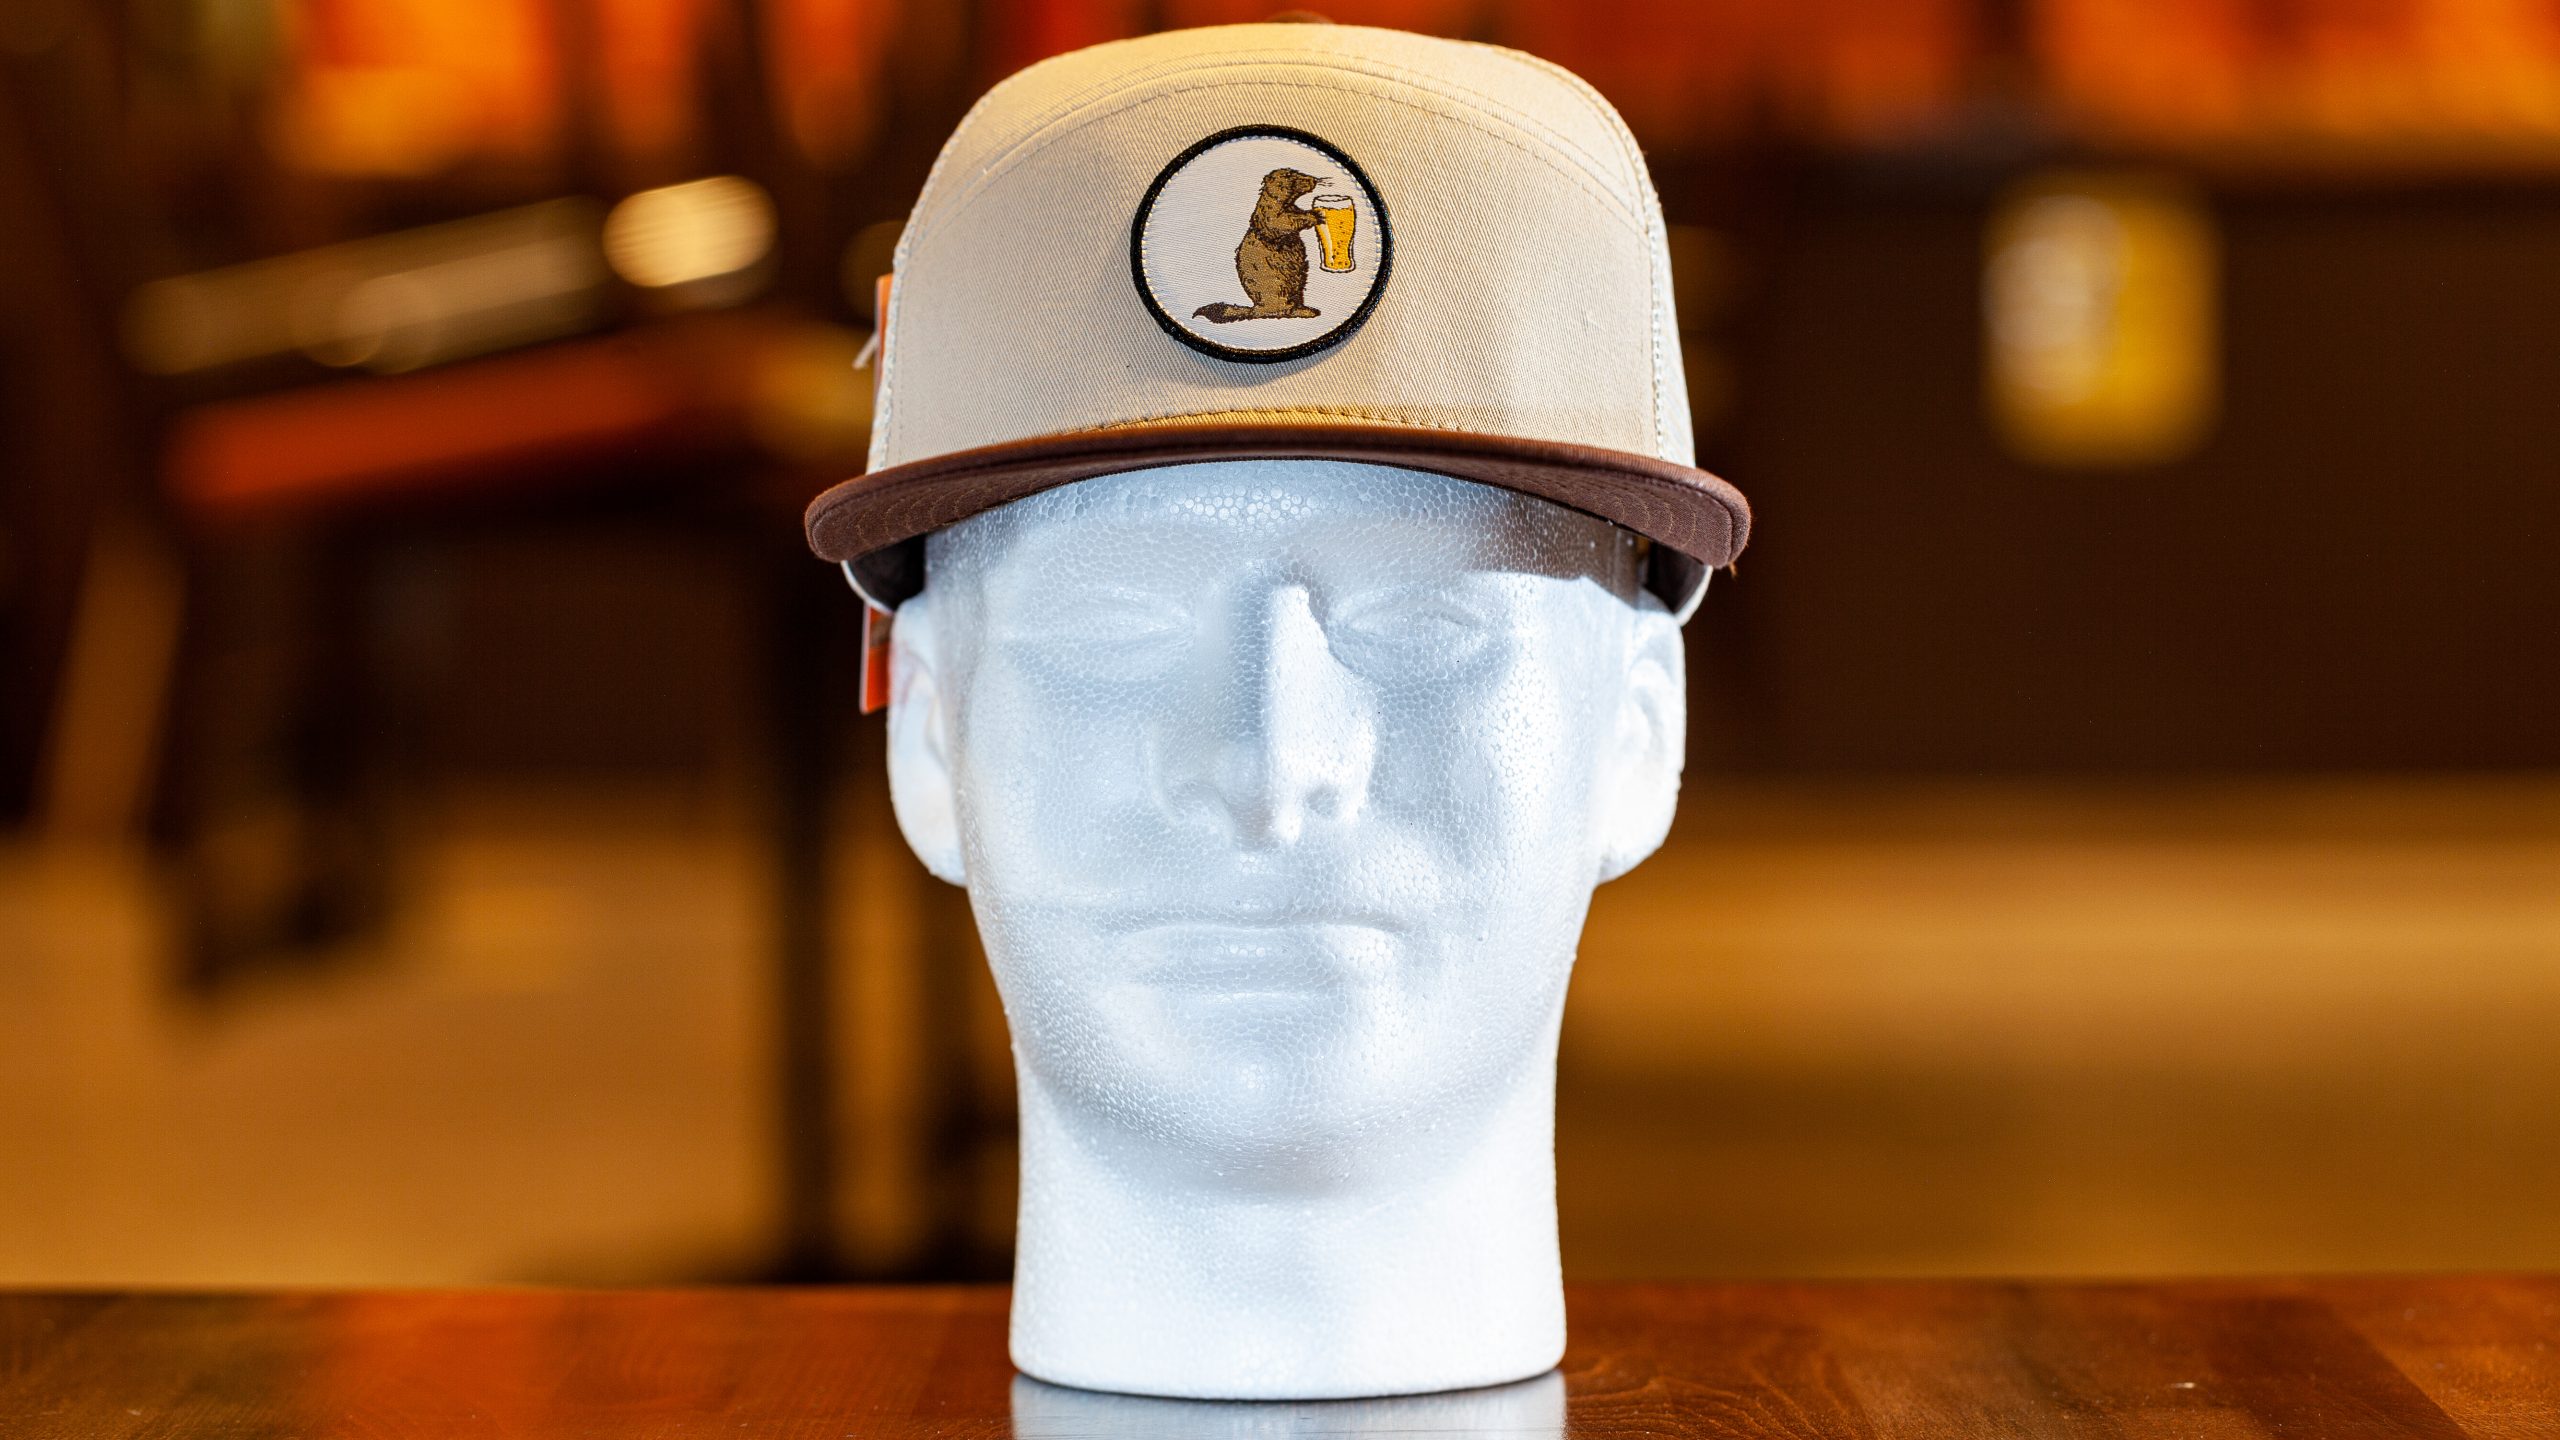 Prairie Dog Brewing trucker hat by Pukka. These hats feature a cream-coloured cotton twill front with a button-style Alby mascot logo, with a brown cotton brim. Cream-coloured trucker mesh and snap-back.